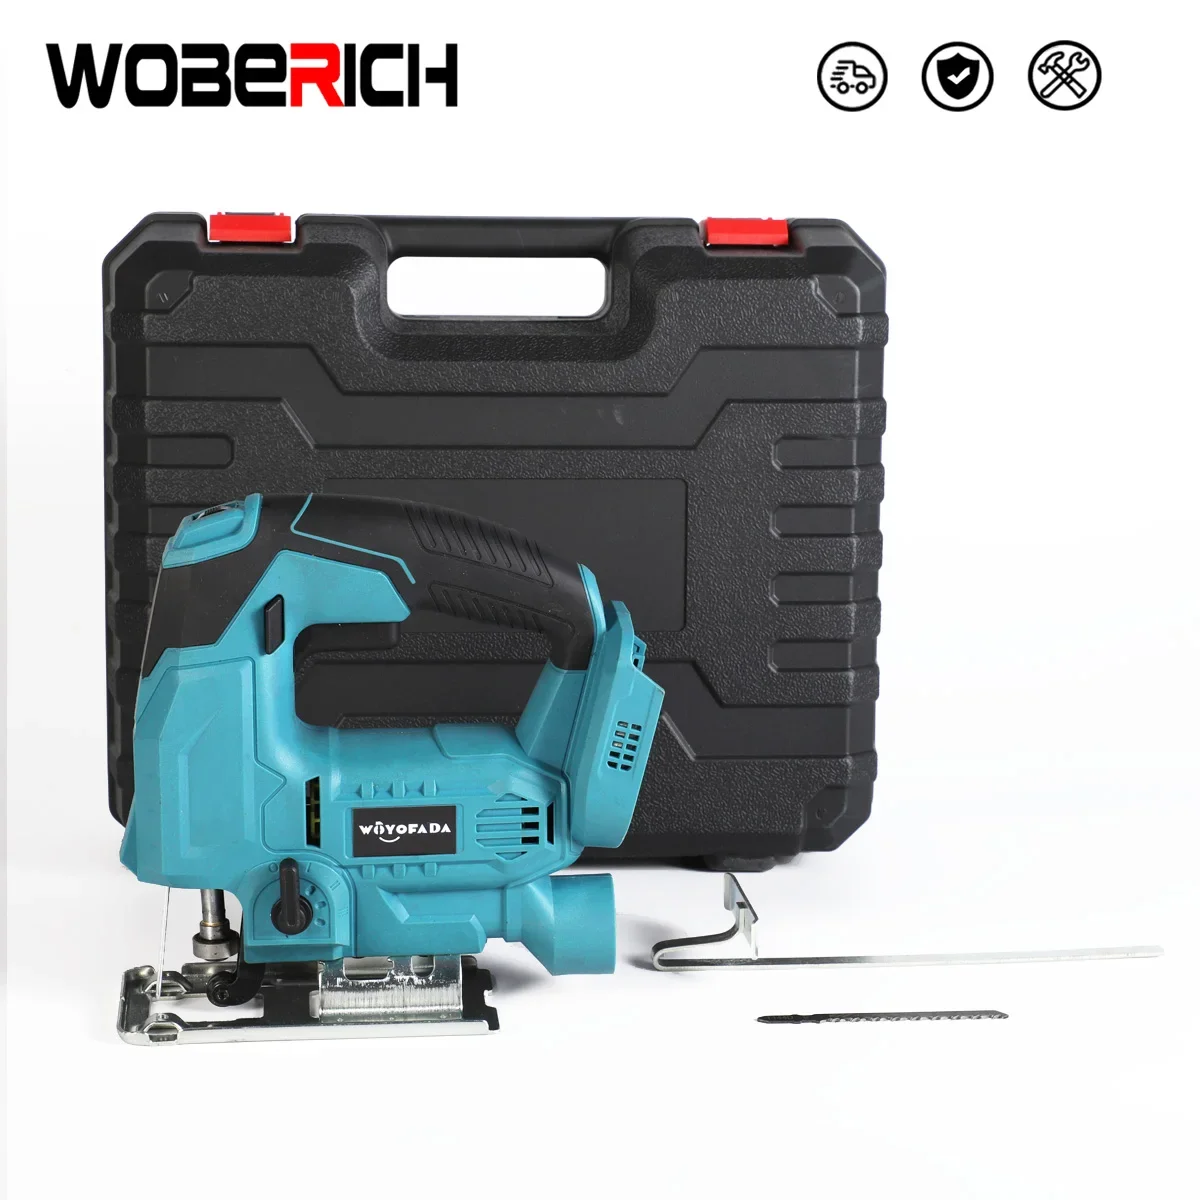 6 Gear Cordless JigSaw With Quick Blade Change Electric Power Tool Jigsaw Woodworking Power for Makita 18V Battery By WOBERICH